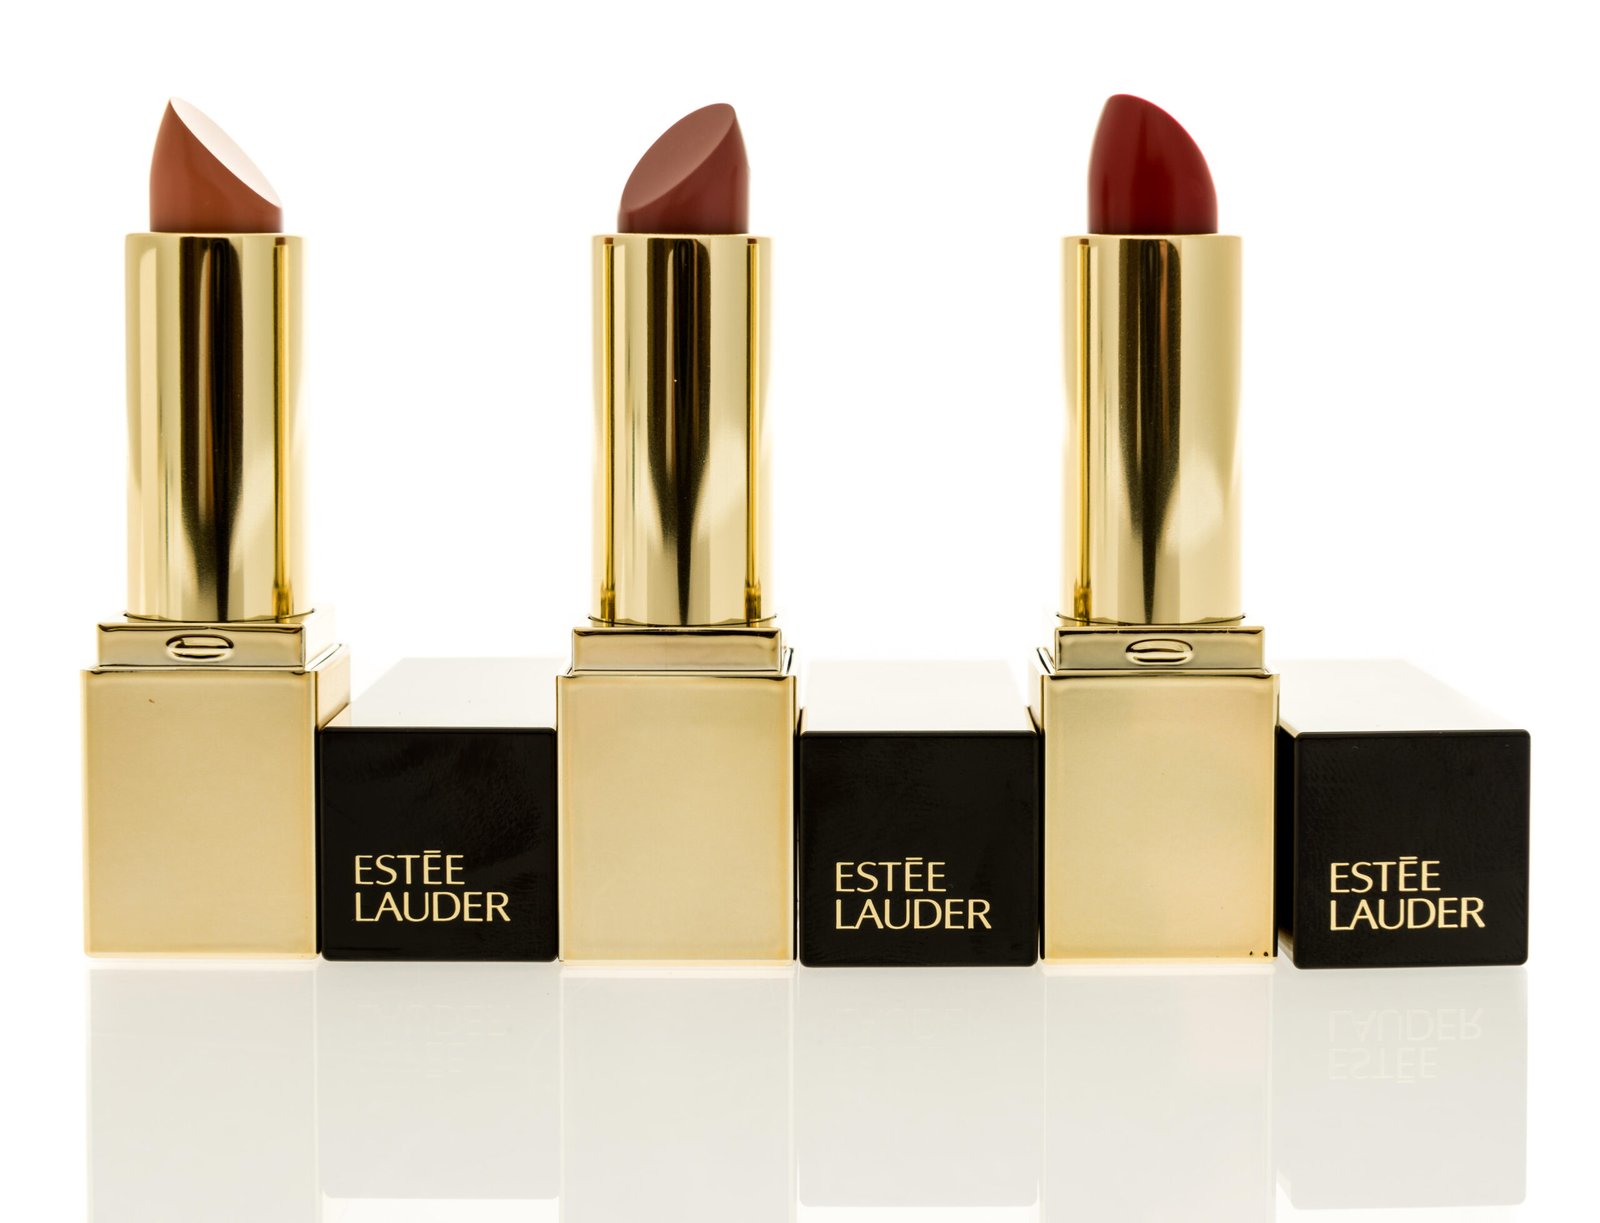 Estée Lauder Breached in Twin MOVEit Hacks, by Different Ransom Groups – Source: www.darkreading.com